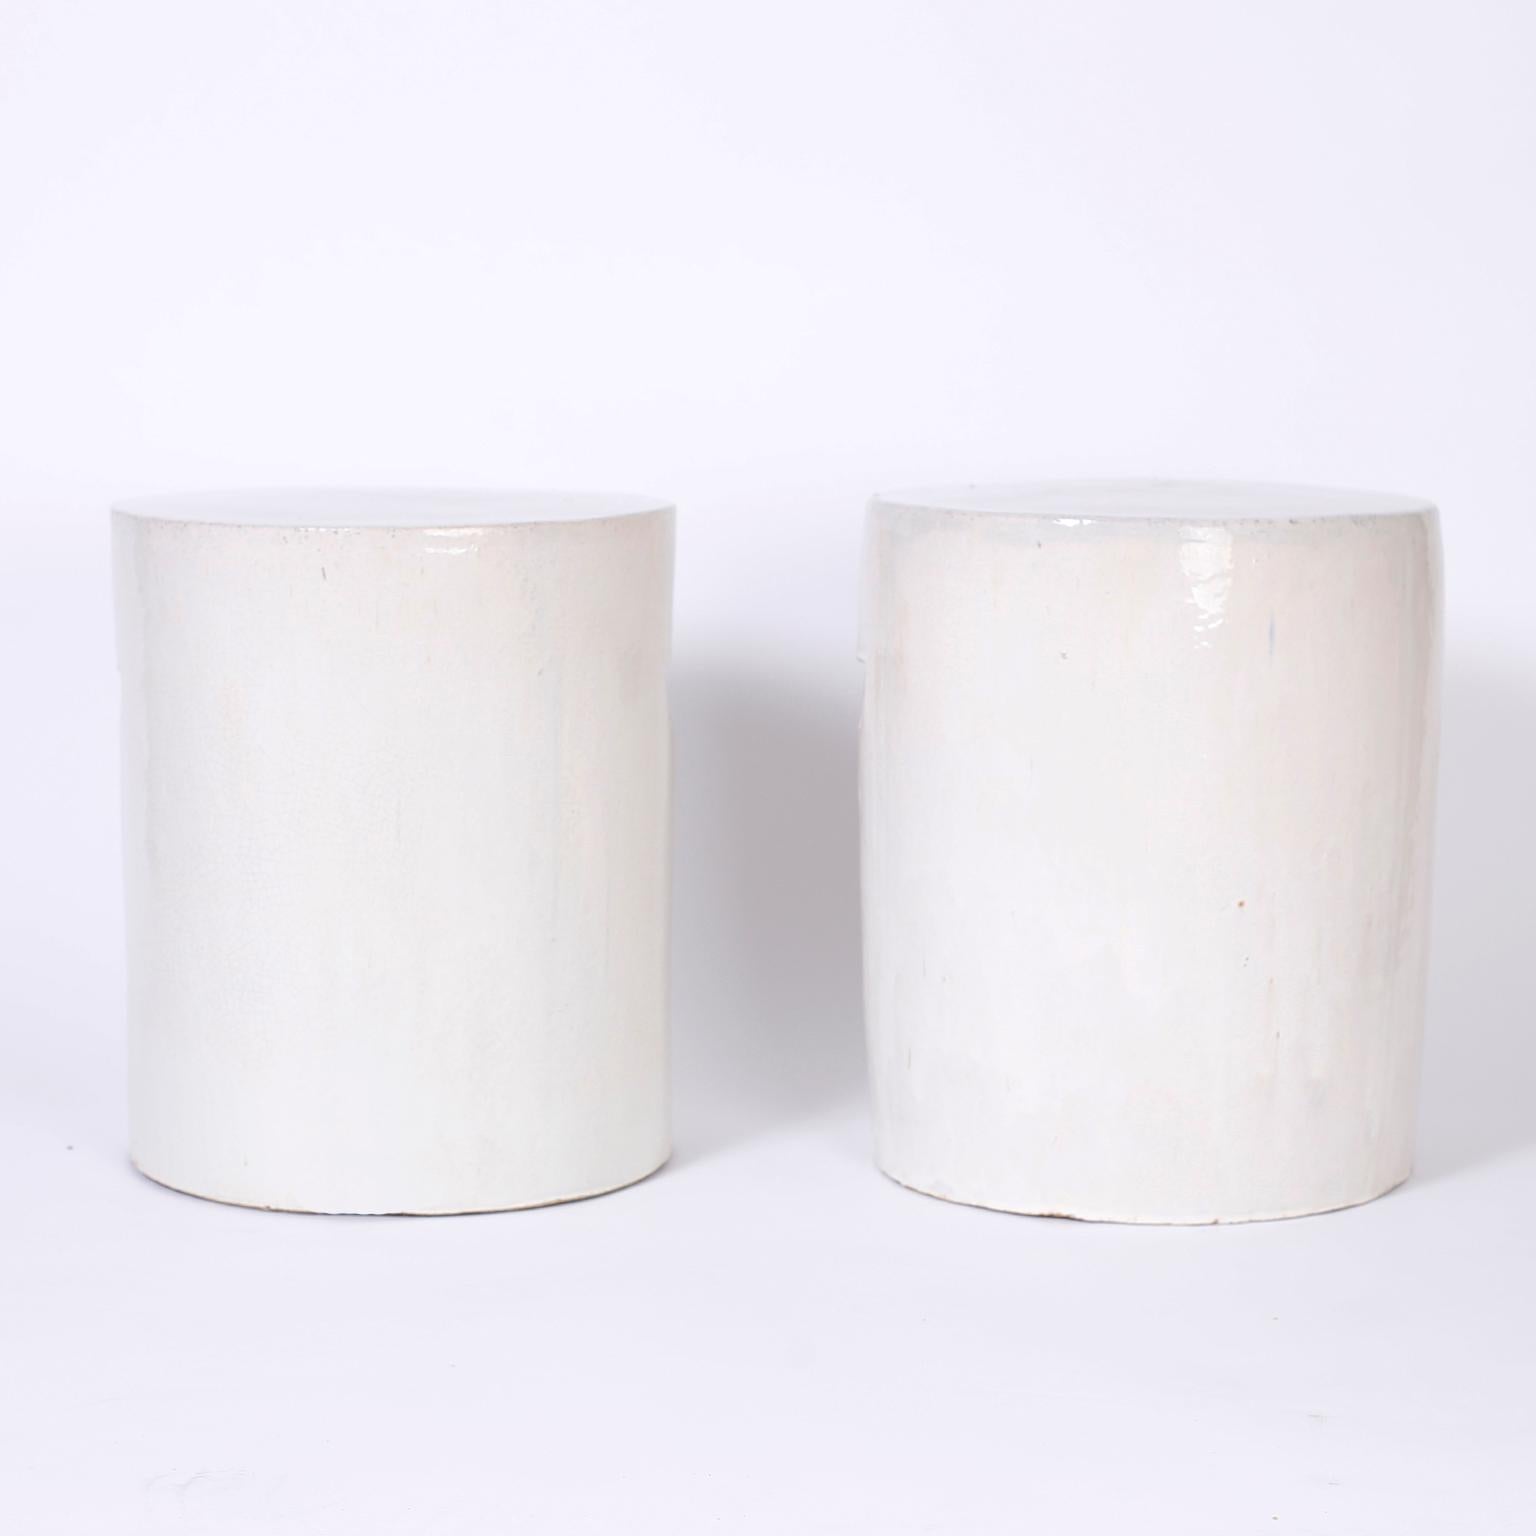 Chic pair of terracotta garden seats with a translucent white or off white celadon crackle glaze over a sleek modern form.